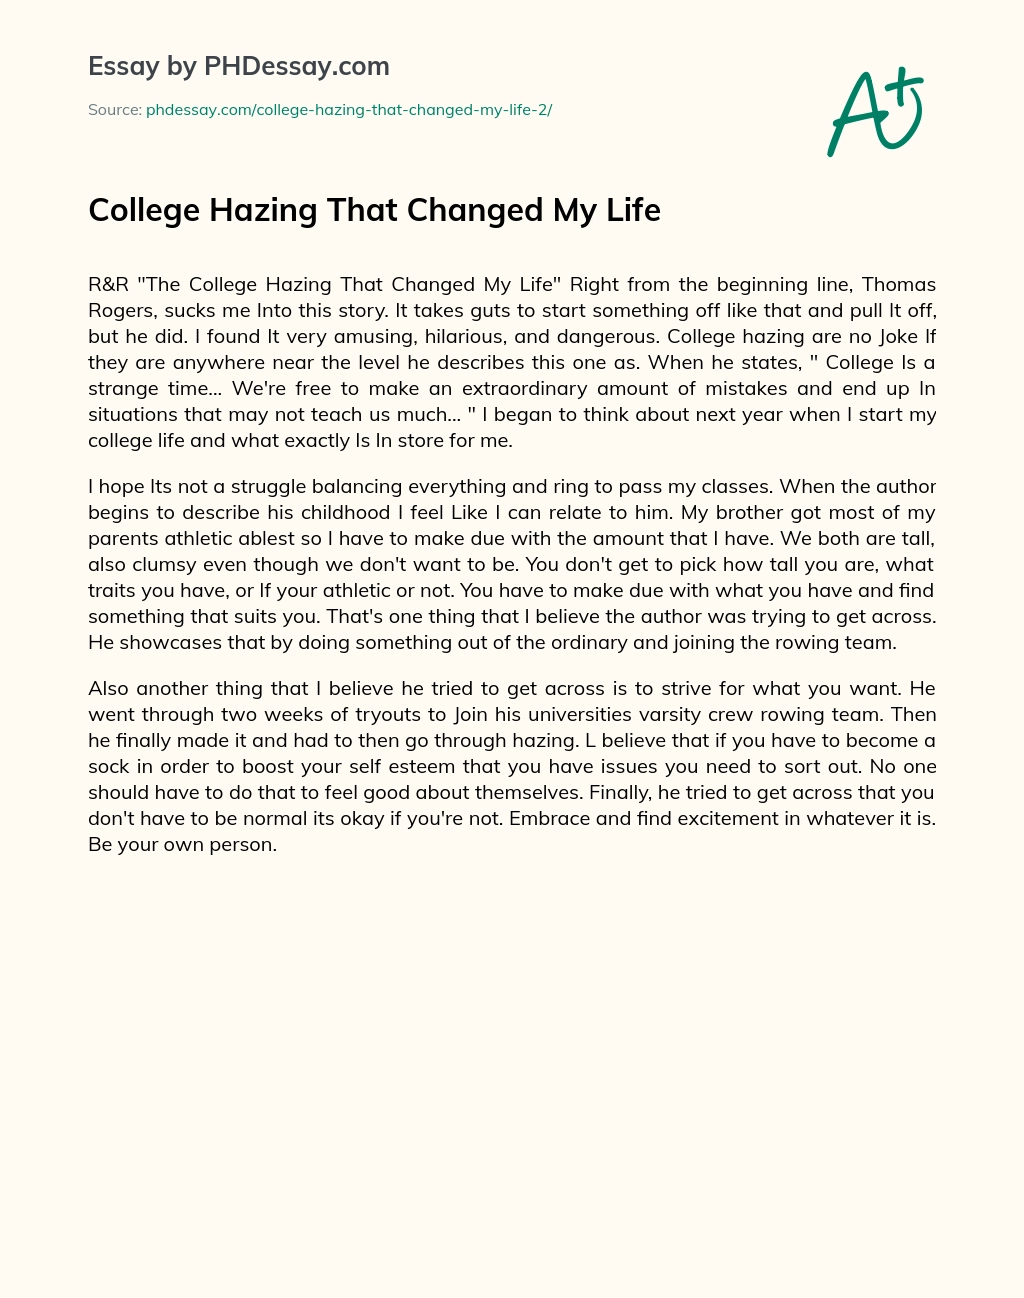 College Hazing That Changed My Life essay